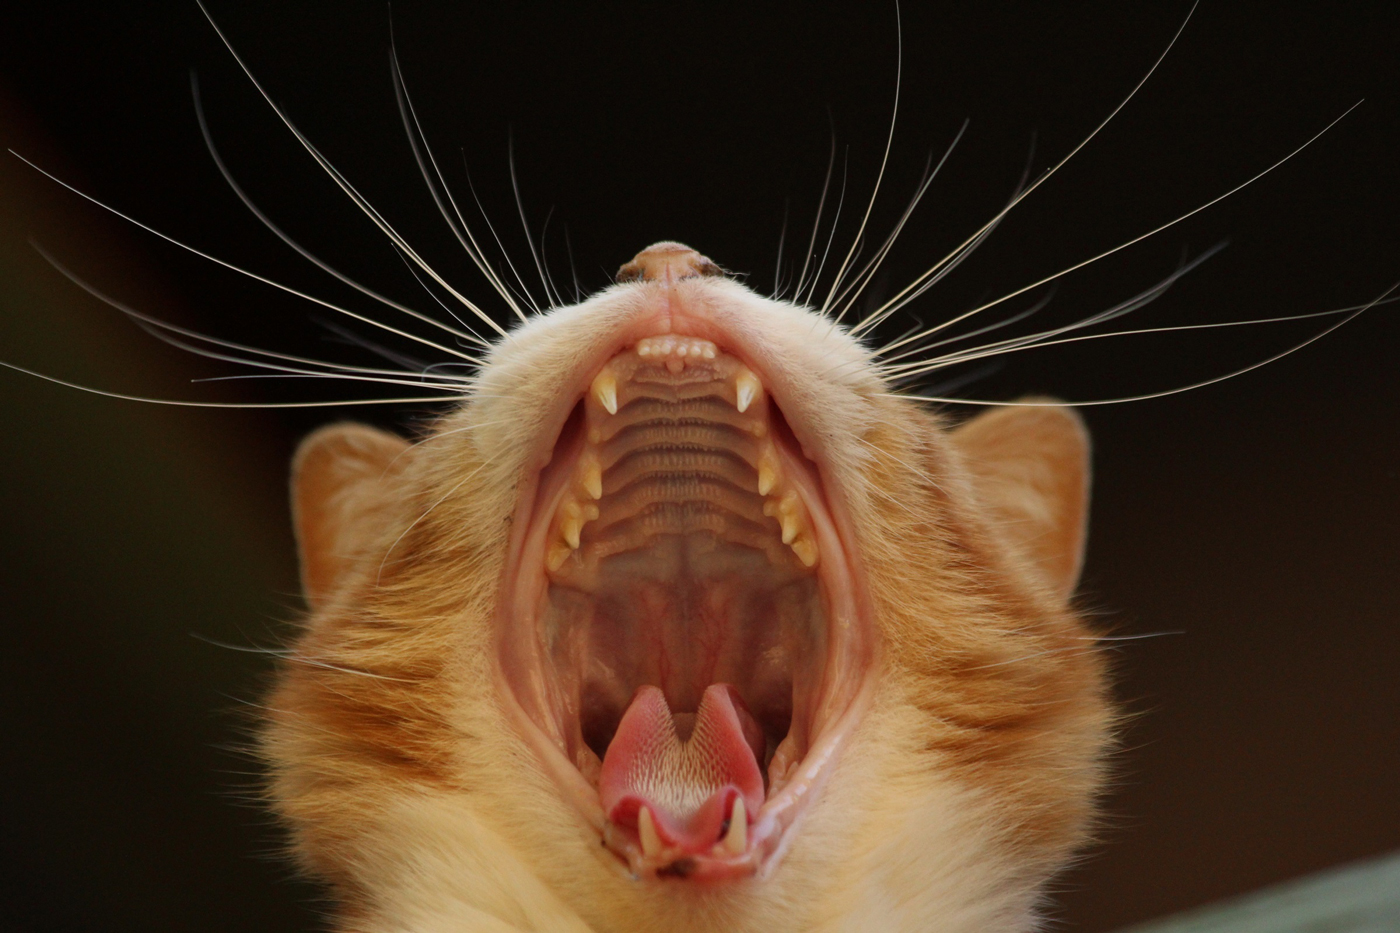 A cat with its mouth open wide